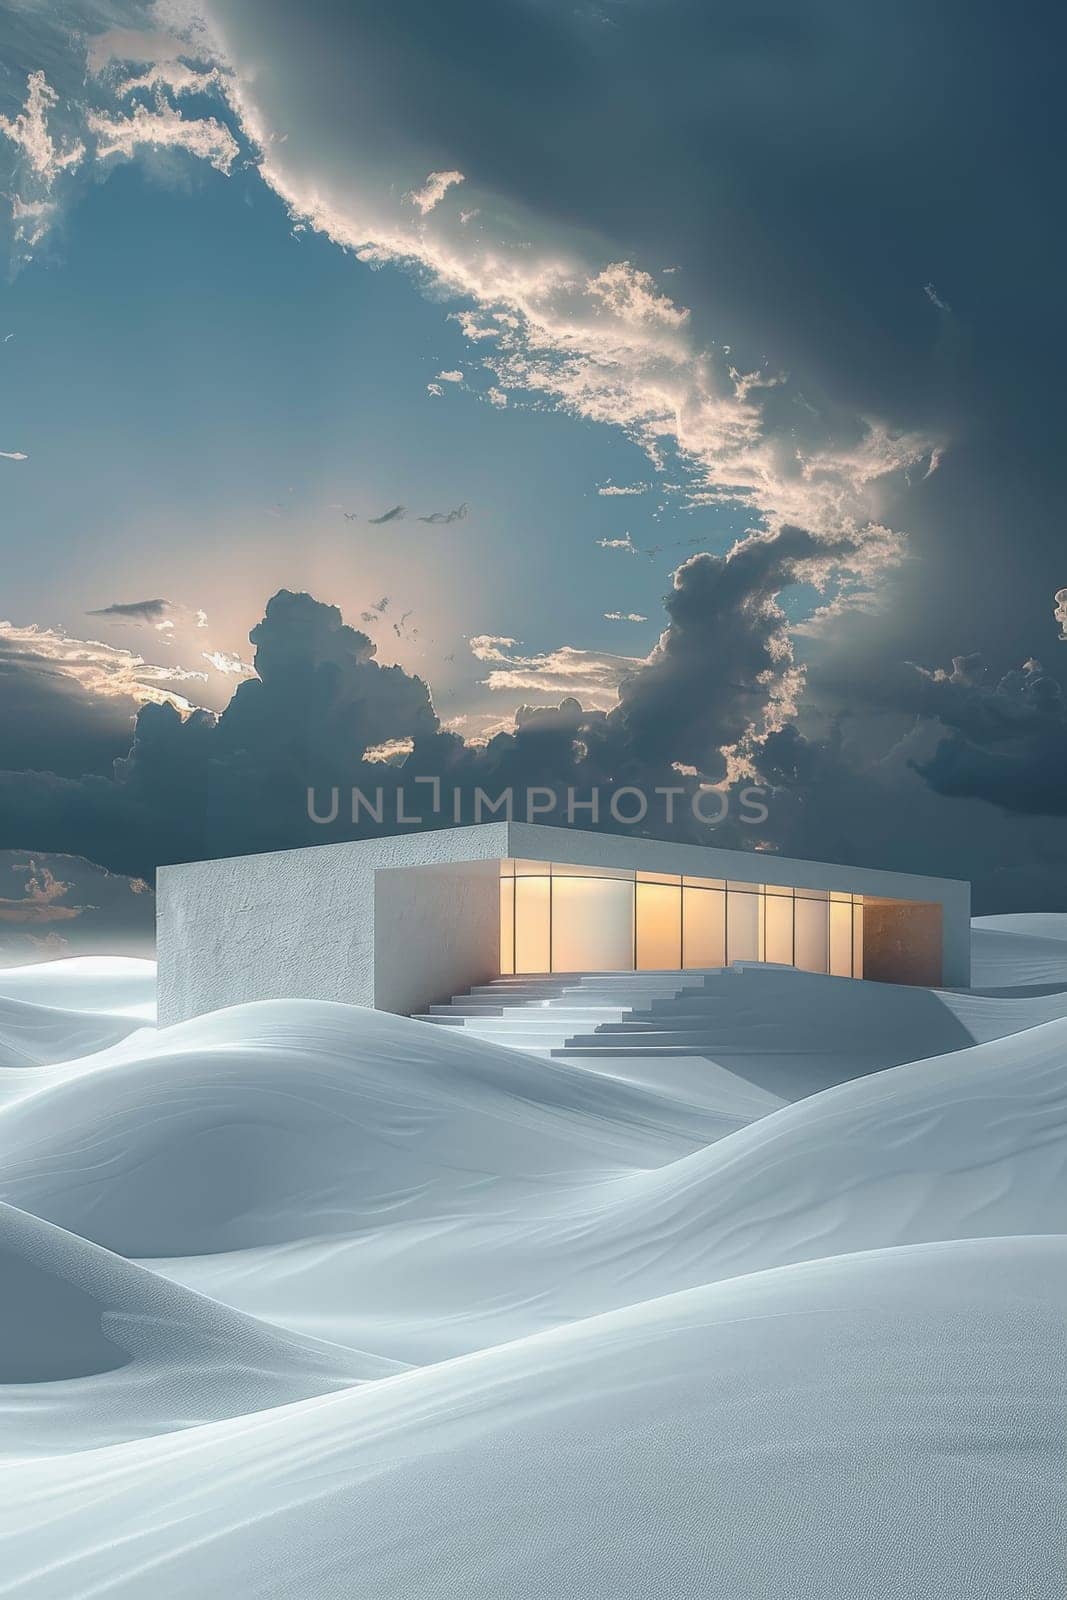 A small white house is on a snowy hill. The sky is cloudy and the sun is setting